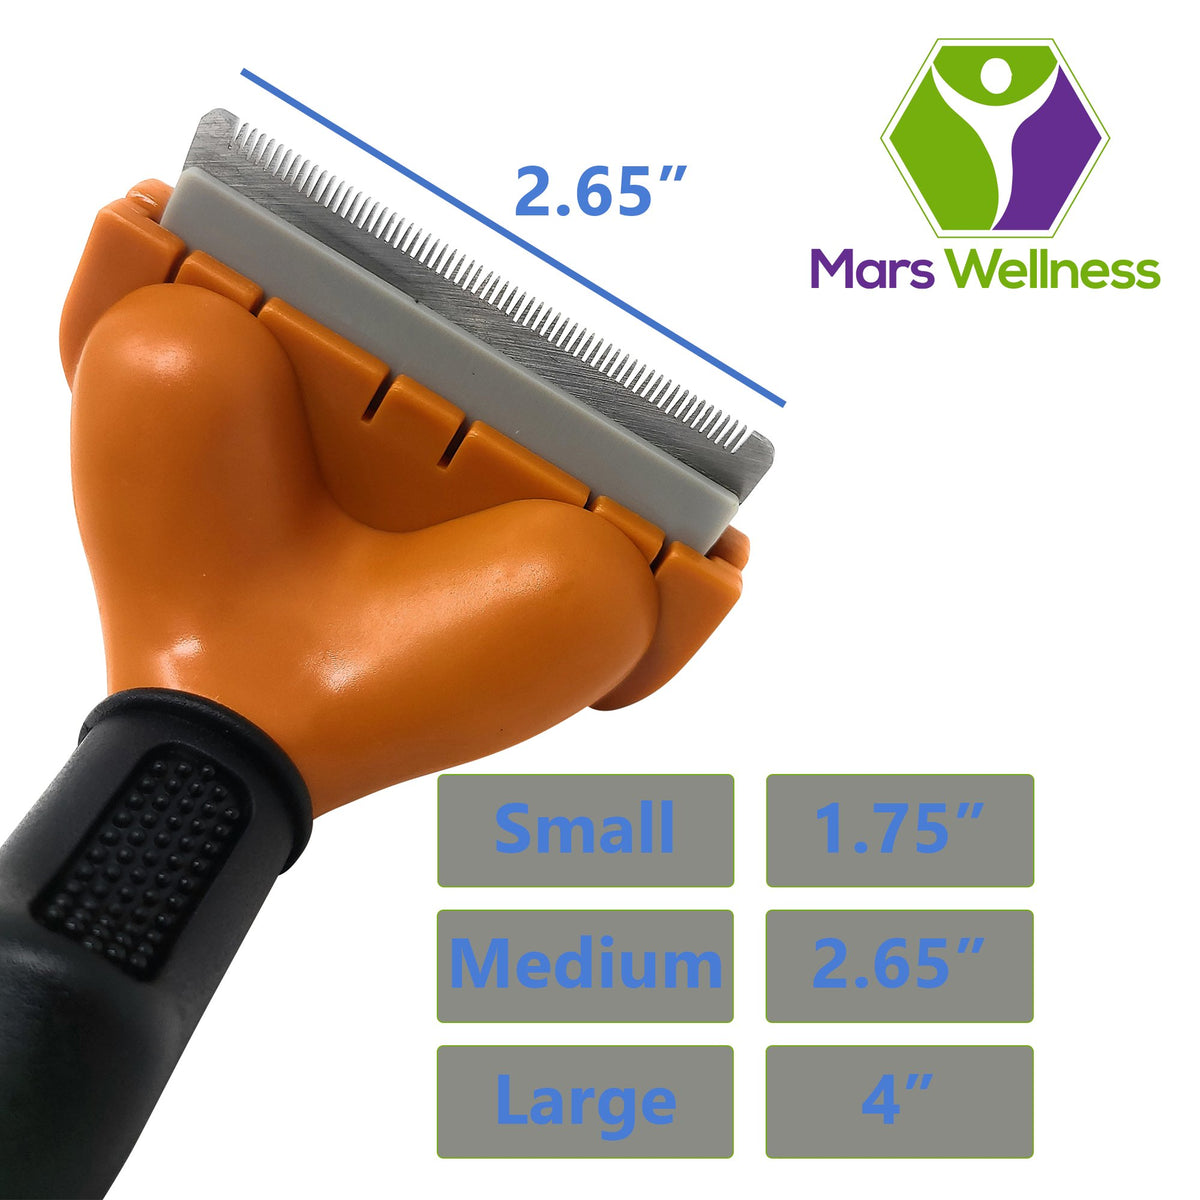 MARS WELLNESS Pet Grooming Brush - Double Sided Shedding and Dematting Tool - Grooming Undercoat Rake for Cats and Dogs - Mars Med Supply